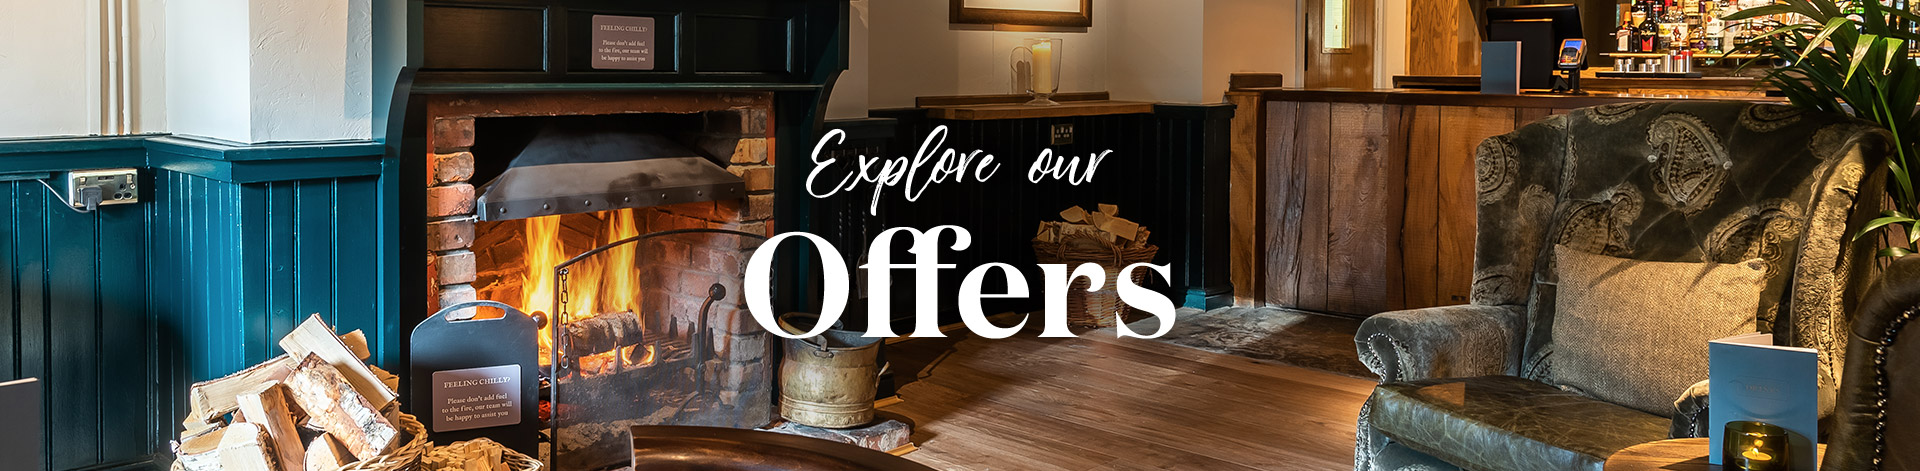 Our latest offers at The Longbridge Mill